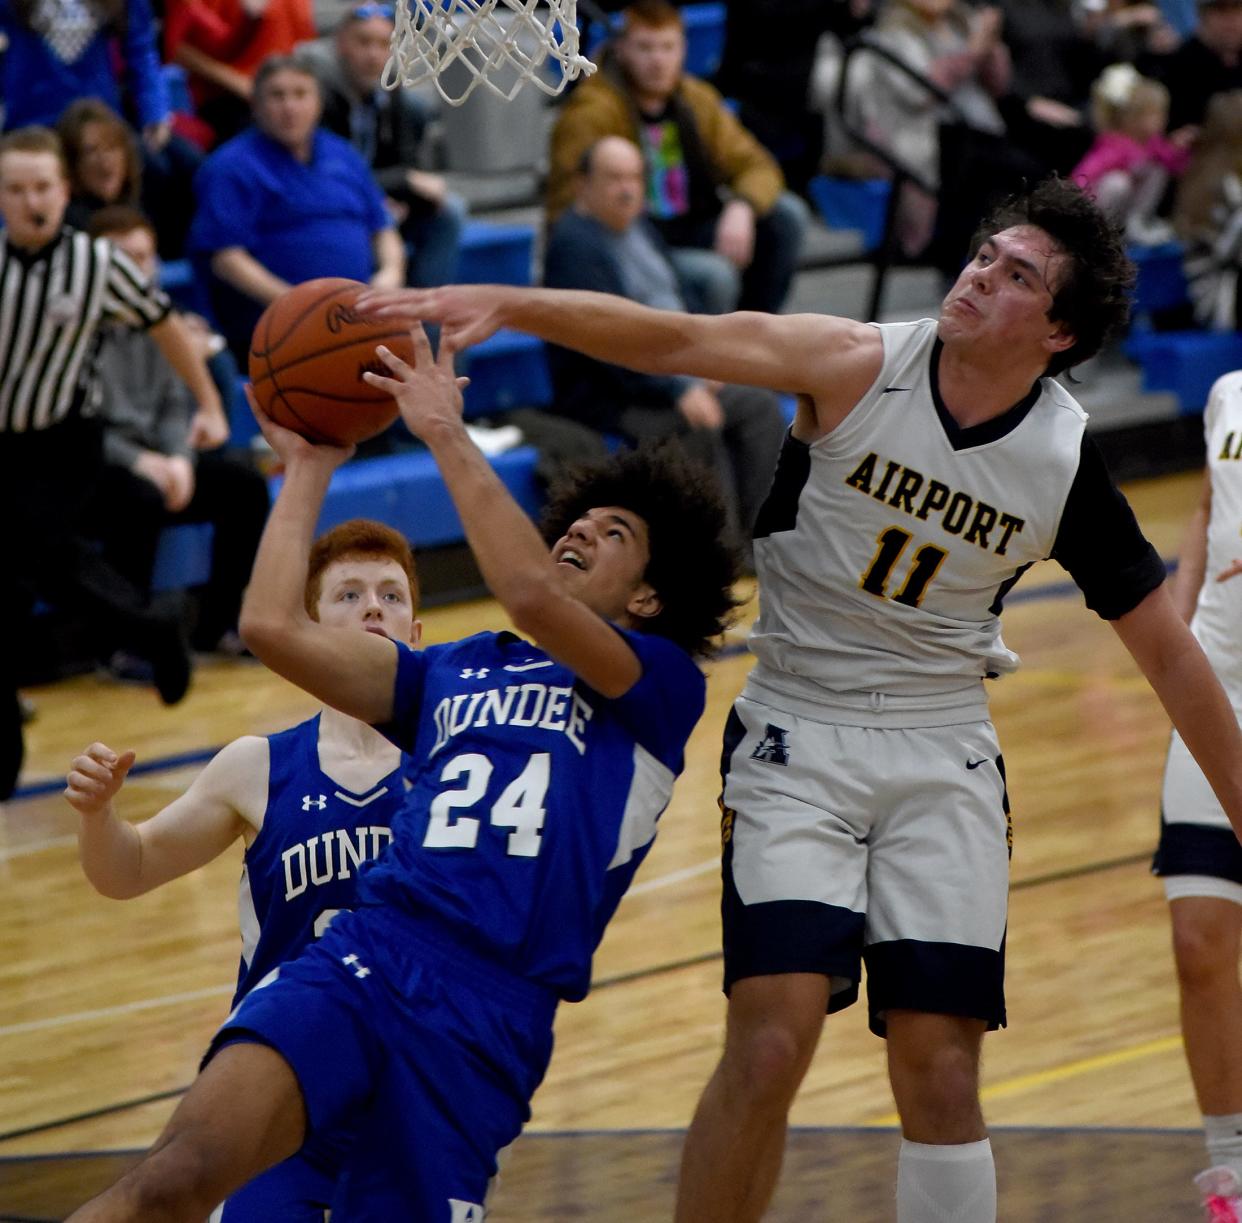 Braiden Whitaker of Dundee goes hard to the hoop but was defended by Copper Nye of Airport Thursday in the Division 2 District semifinals at Dundee.